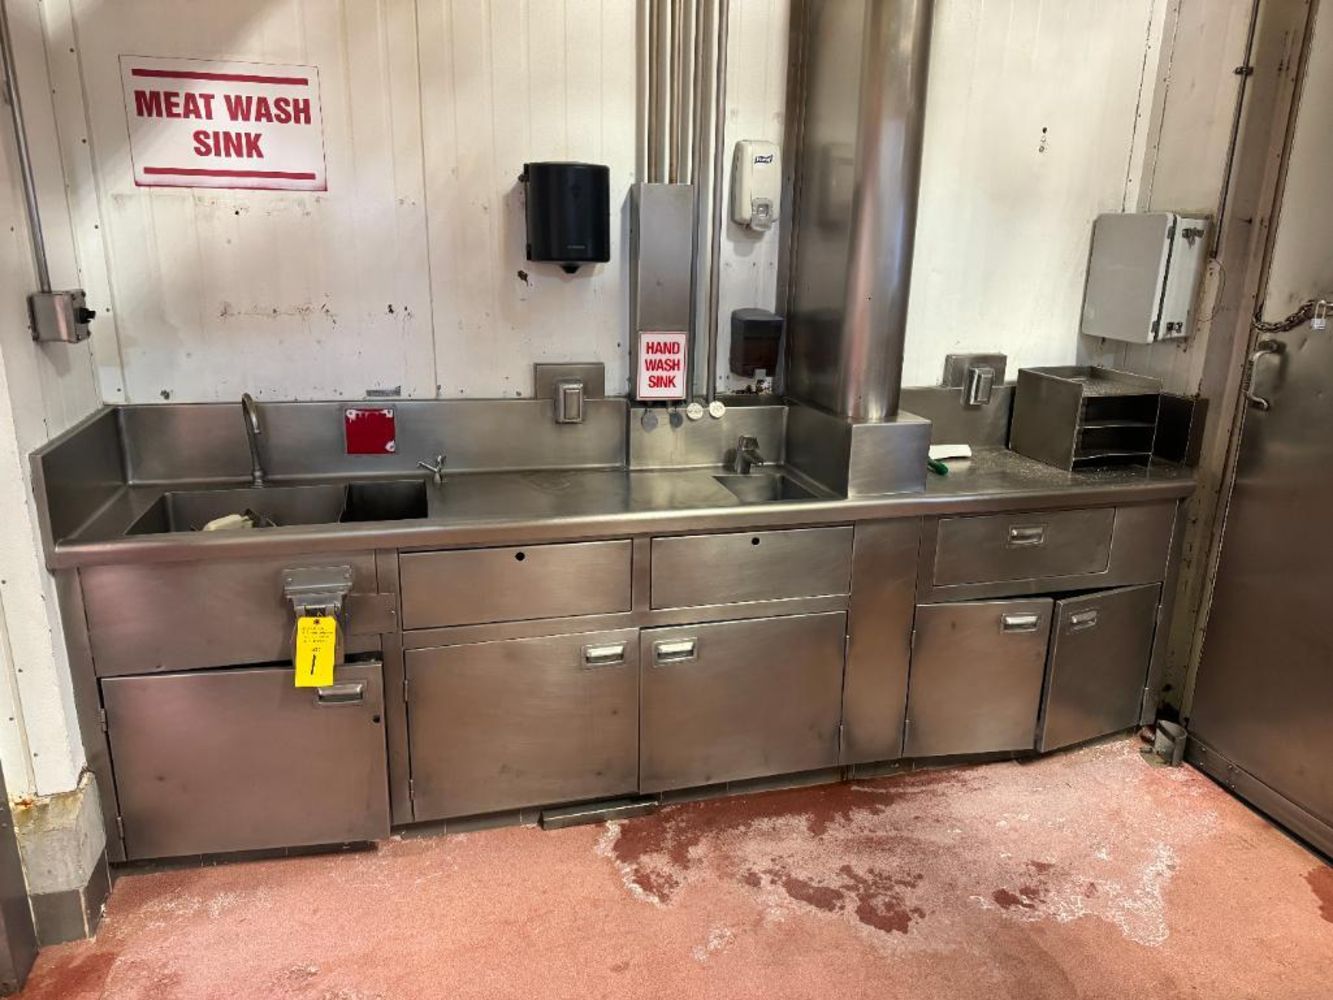 Surplus Equipment Sale from the ongoing operations of Food Processing Facility